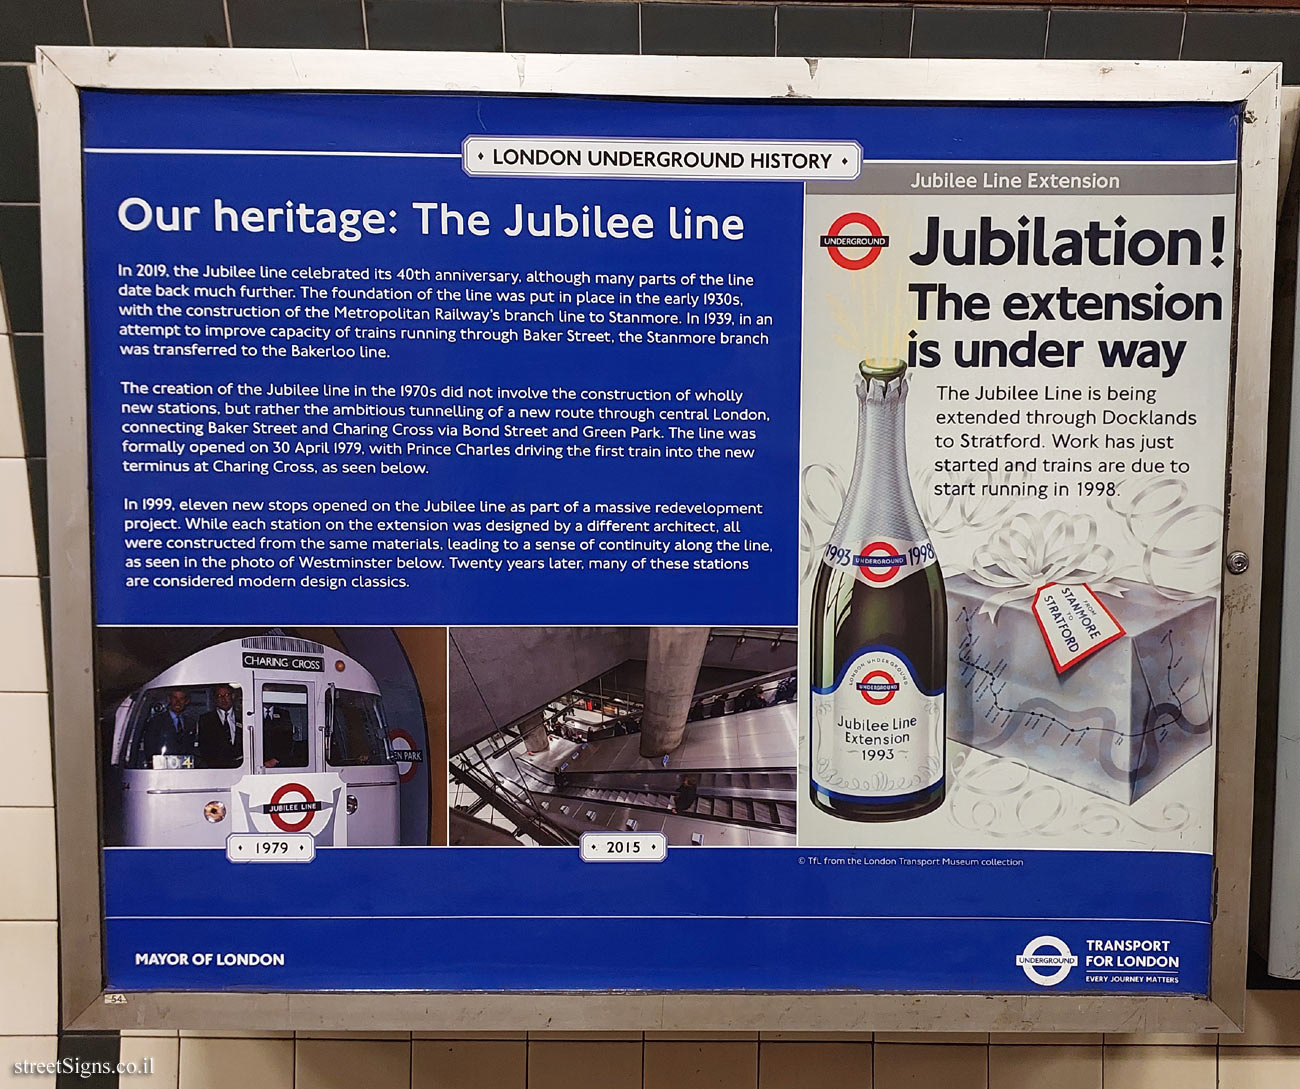 London -  London Underground History - Our heritage: The Jubilee line